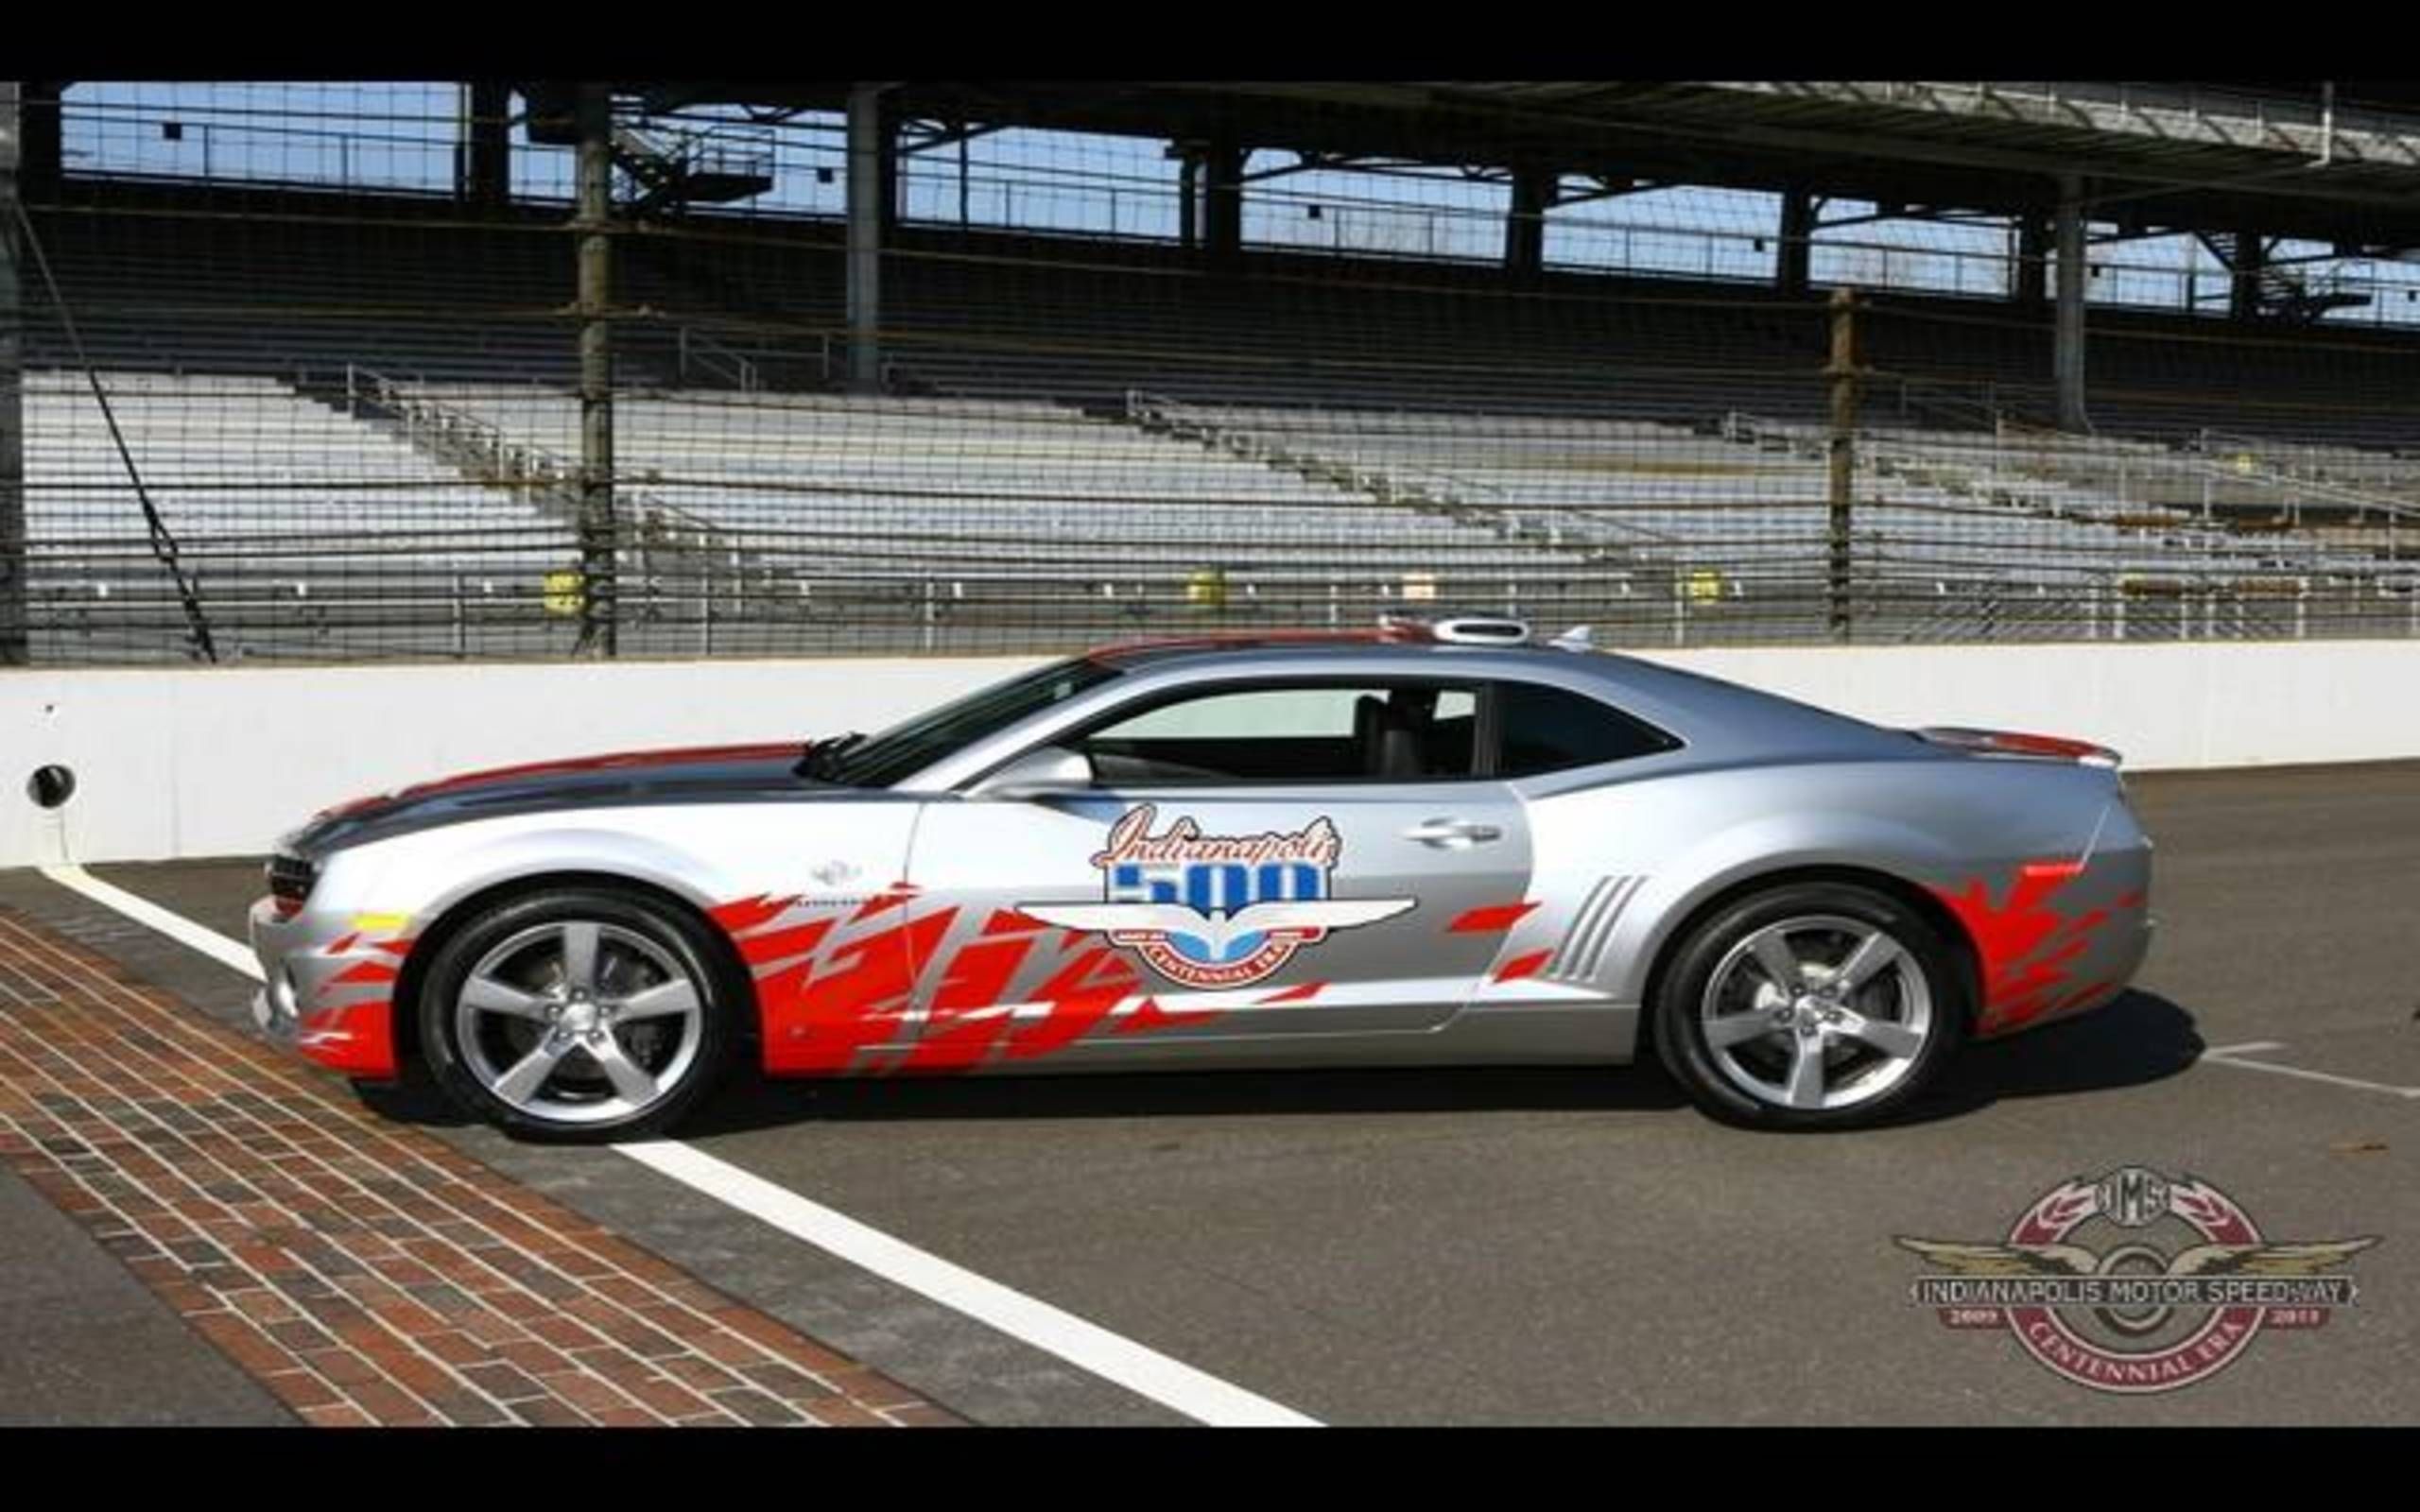 New Chevrolet Camaro to pace Indy 500